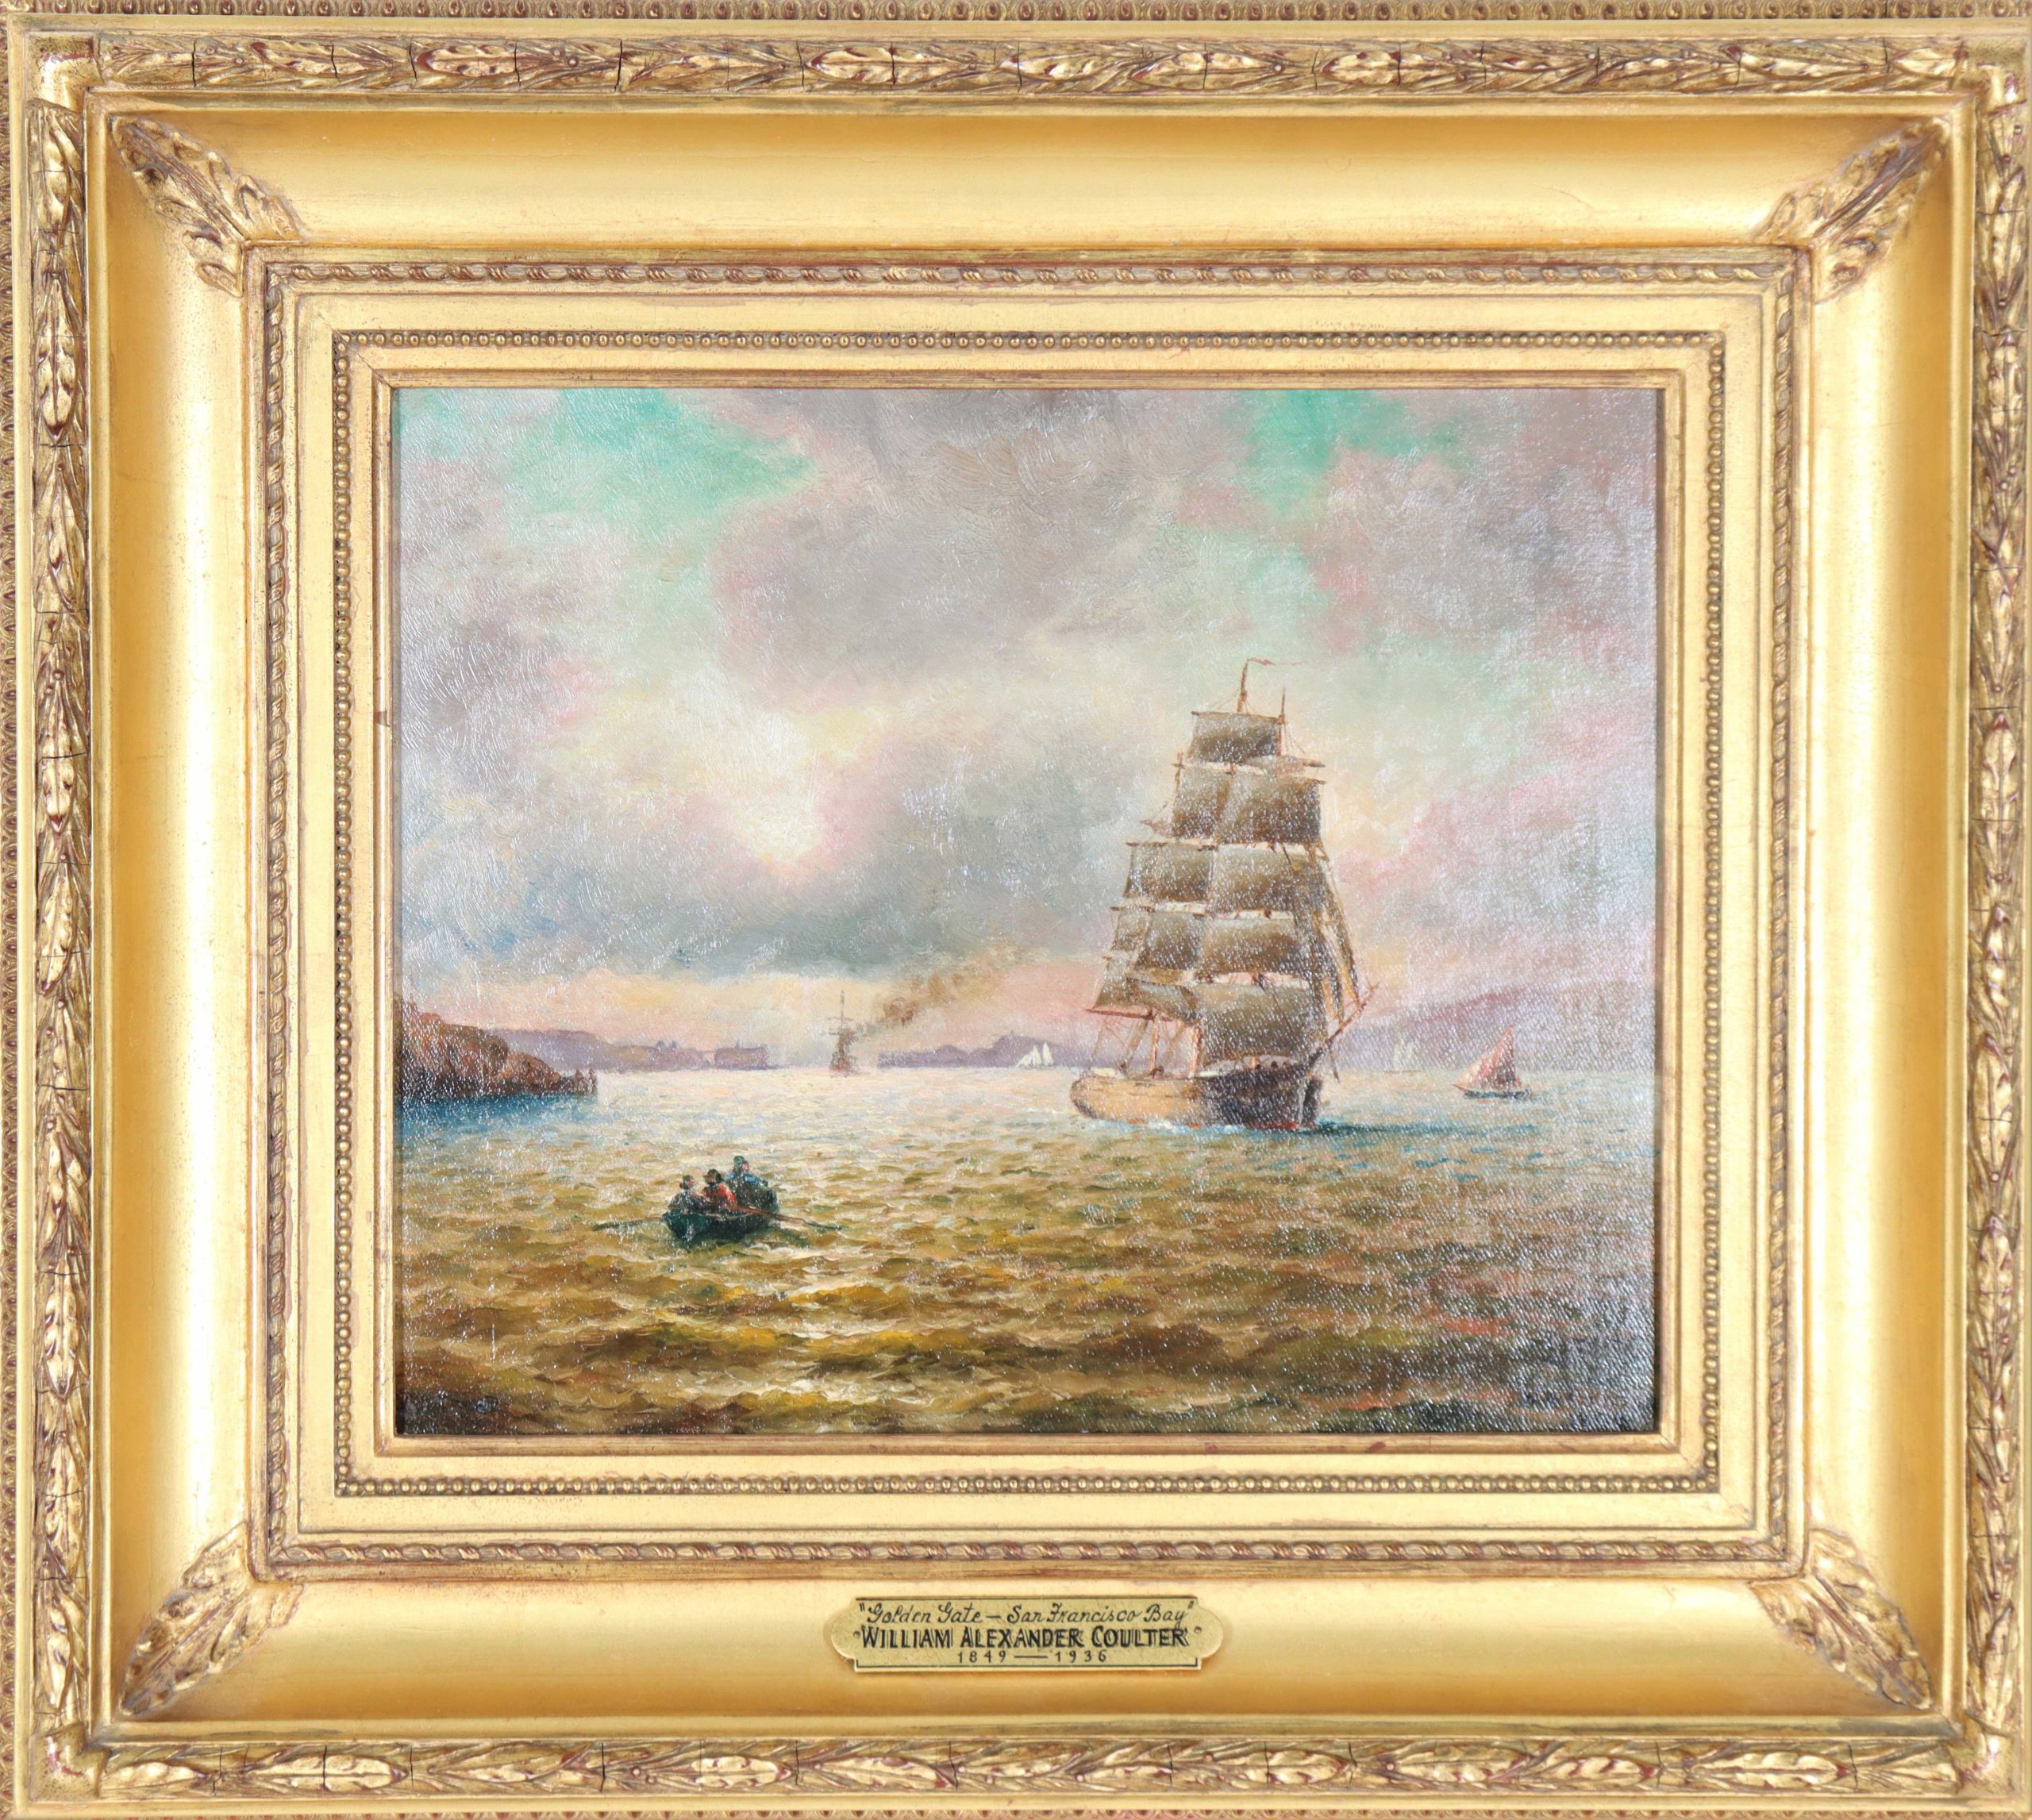 You are currently viewing Willam Alexander Coulter (1849-1936) Golden Gate-San Francisco Bay